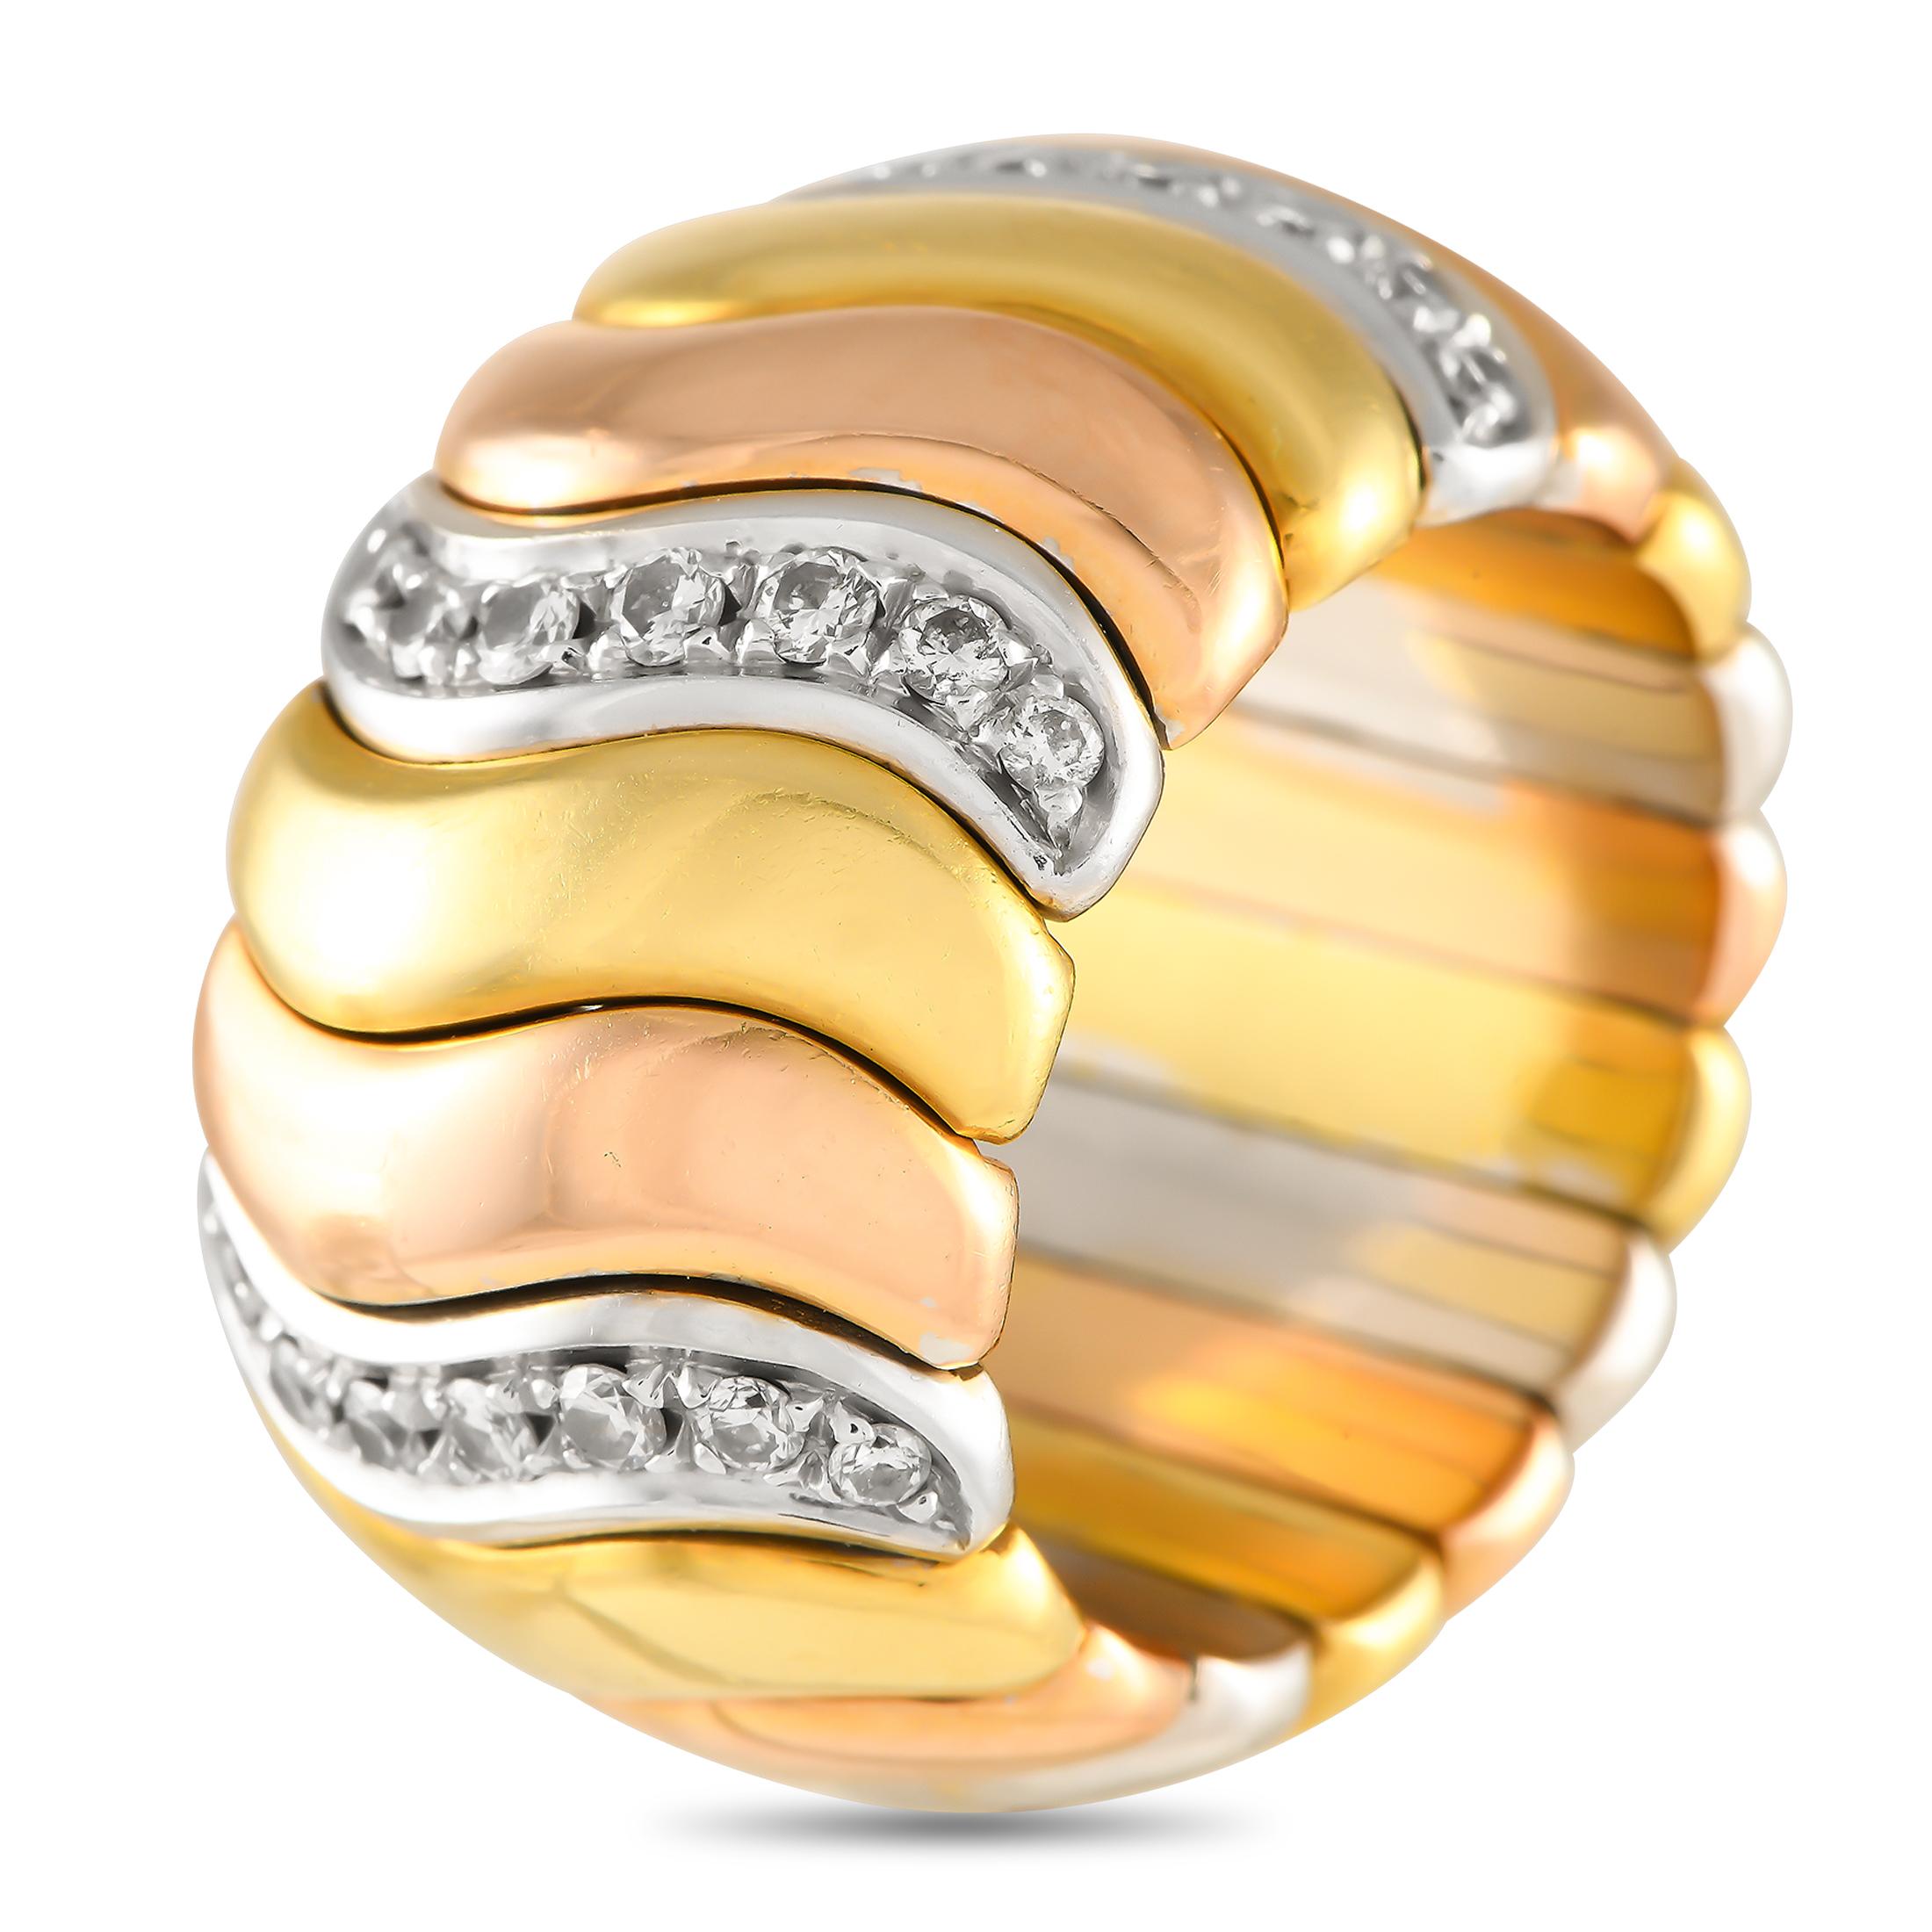 Wavy strips of yellow, white, and rose gold make up the statement-making style of this wide, domed band. The ring also features wavy rows of brilliant diamonds for that unexpected sparkle. The ring's top dimensions measure 17mm x 13mm.This 18K